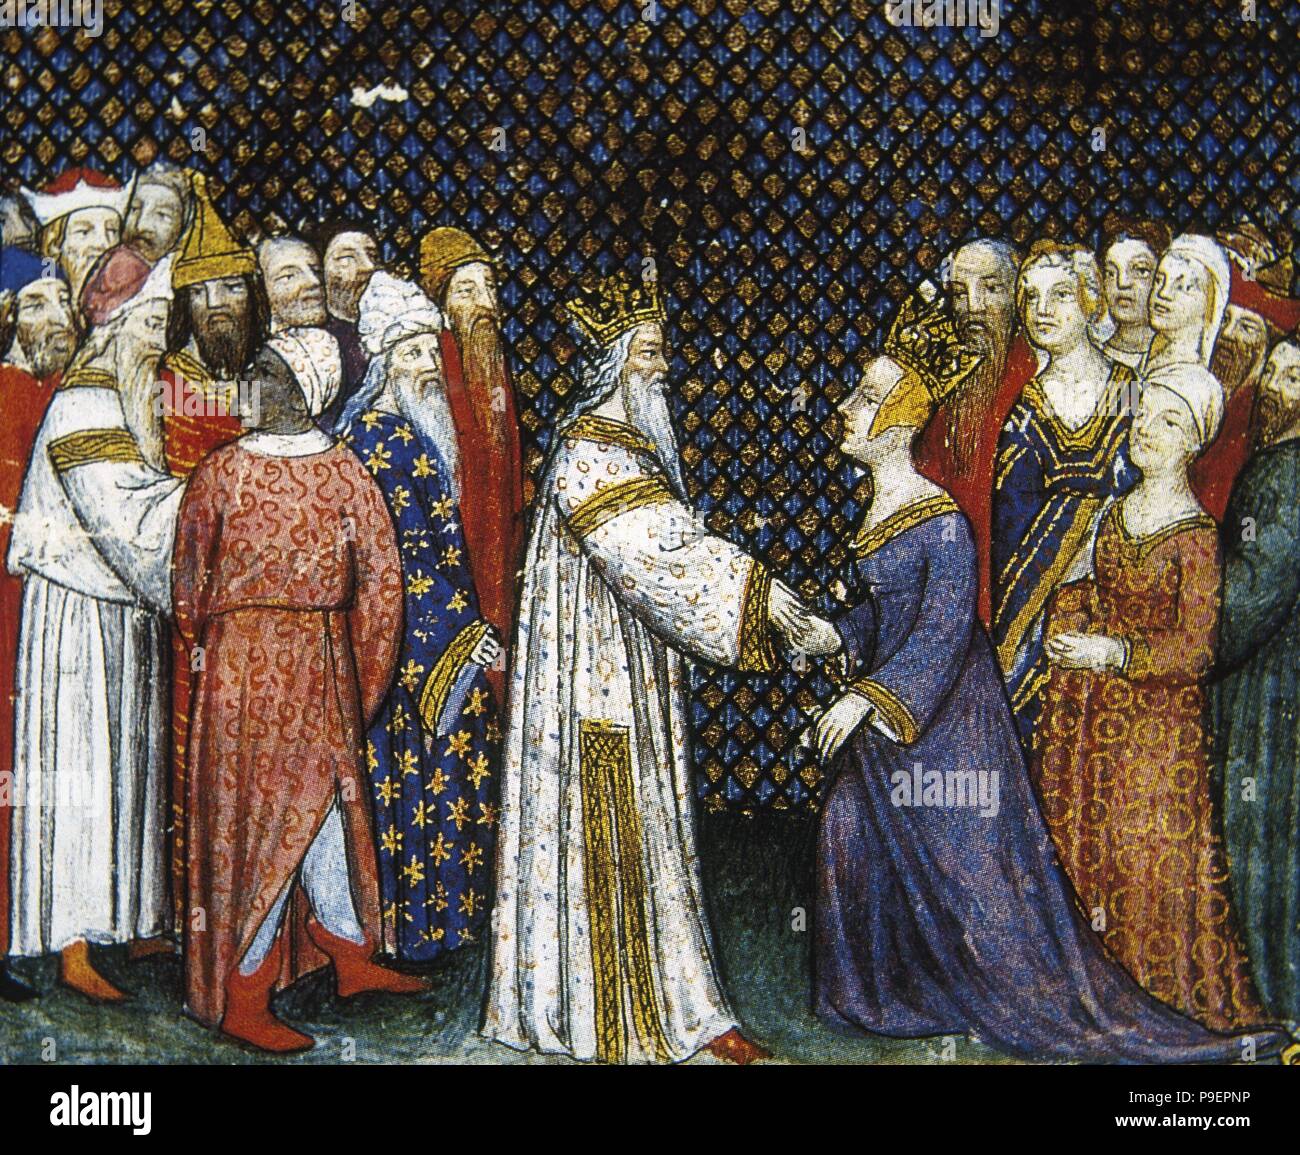 Basina of Thuringia (438-477)  husband of King Basinus. She herself took the initiative to ask for the hand of Childeric I, king of the Franks, and married him. Miniature 15th century: Marriage between Childeric I and Basina. 'Les Chroniques de France' or 'Les Chroniques de Saint-Denis'. Conde Museum. France. Stock Photo